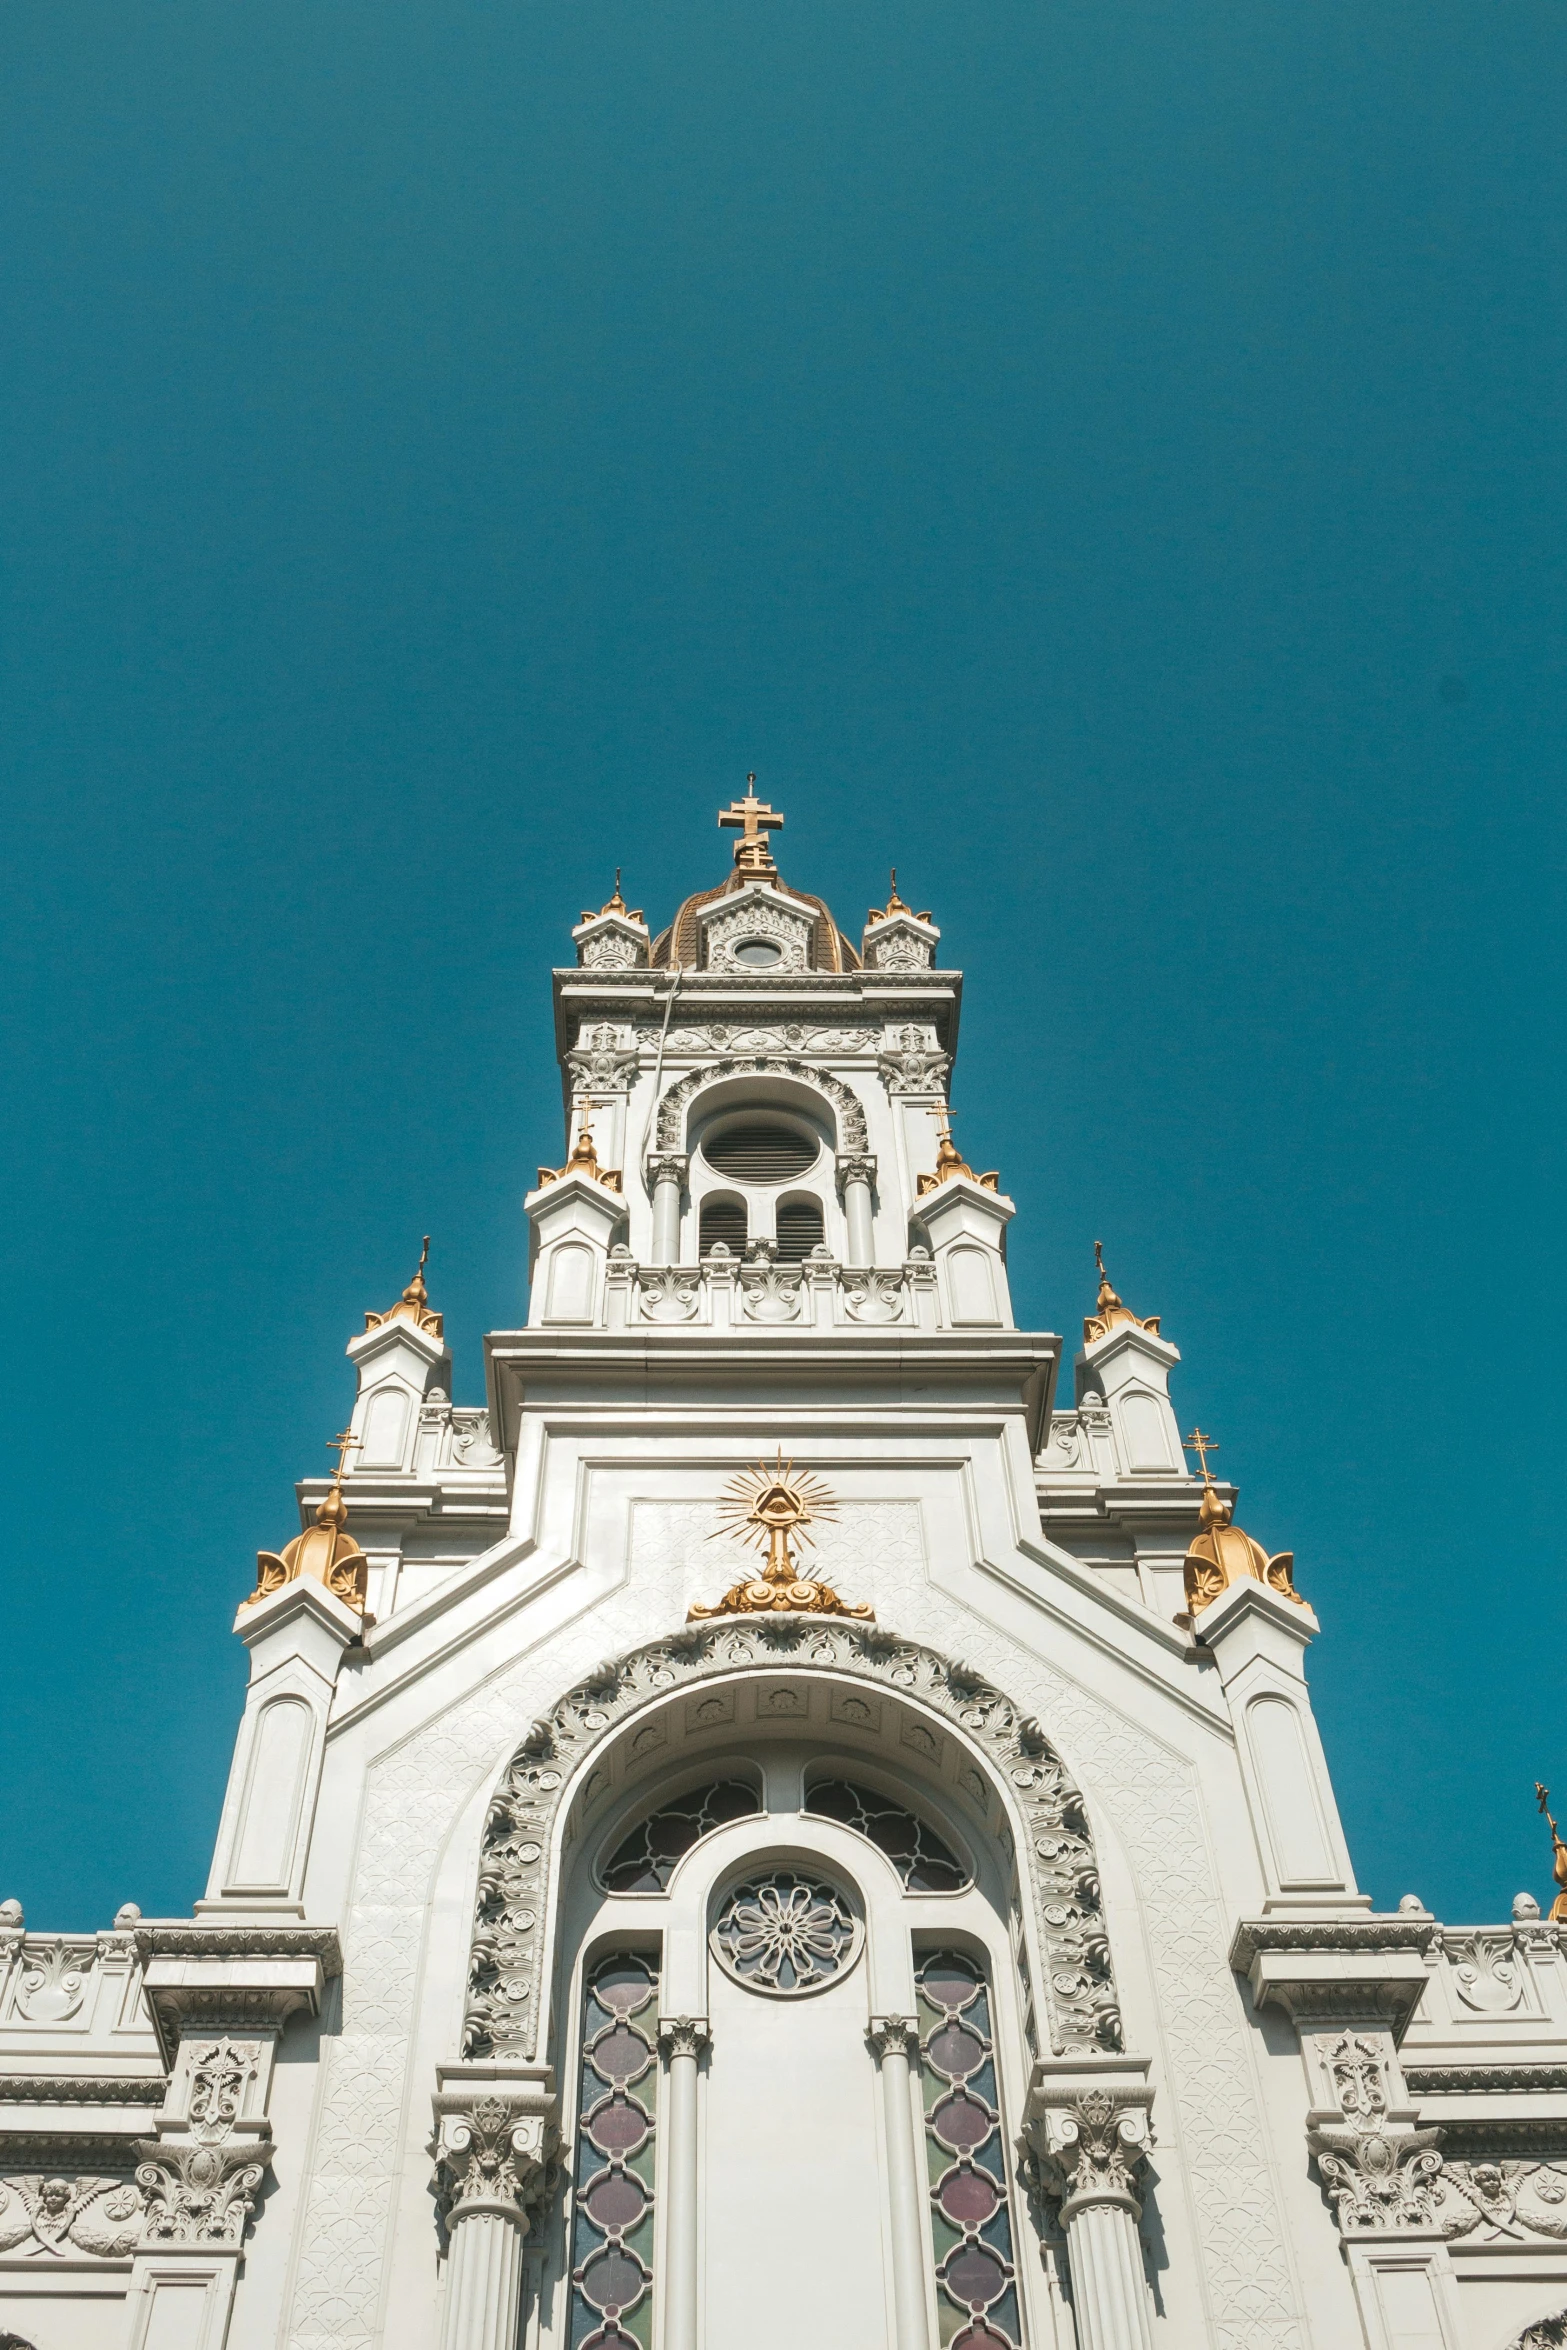 a tall white building with a clock tower, an album cover, unsplash contest winner, baroque, beautiful gold saint, buenos aires, indian temple, 2019 trending photo